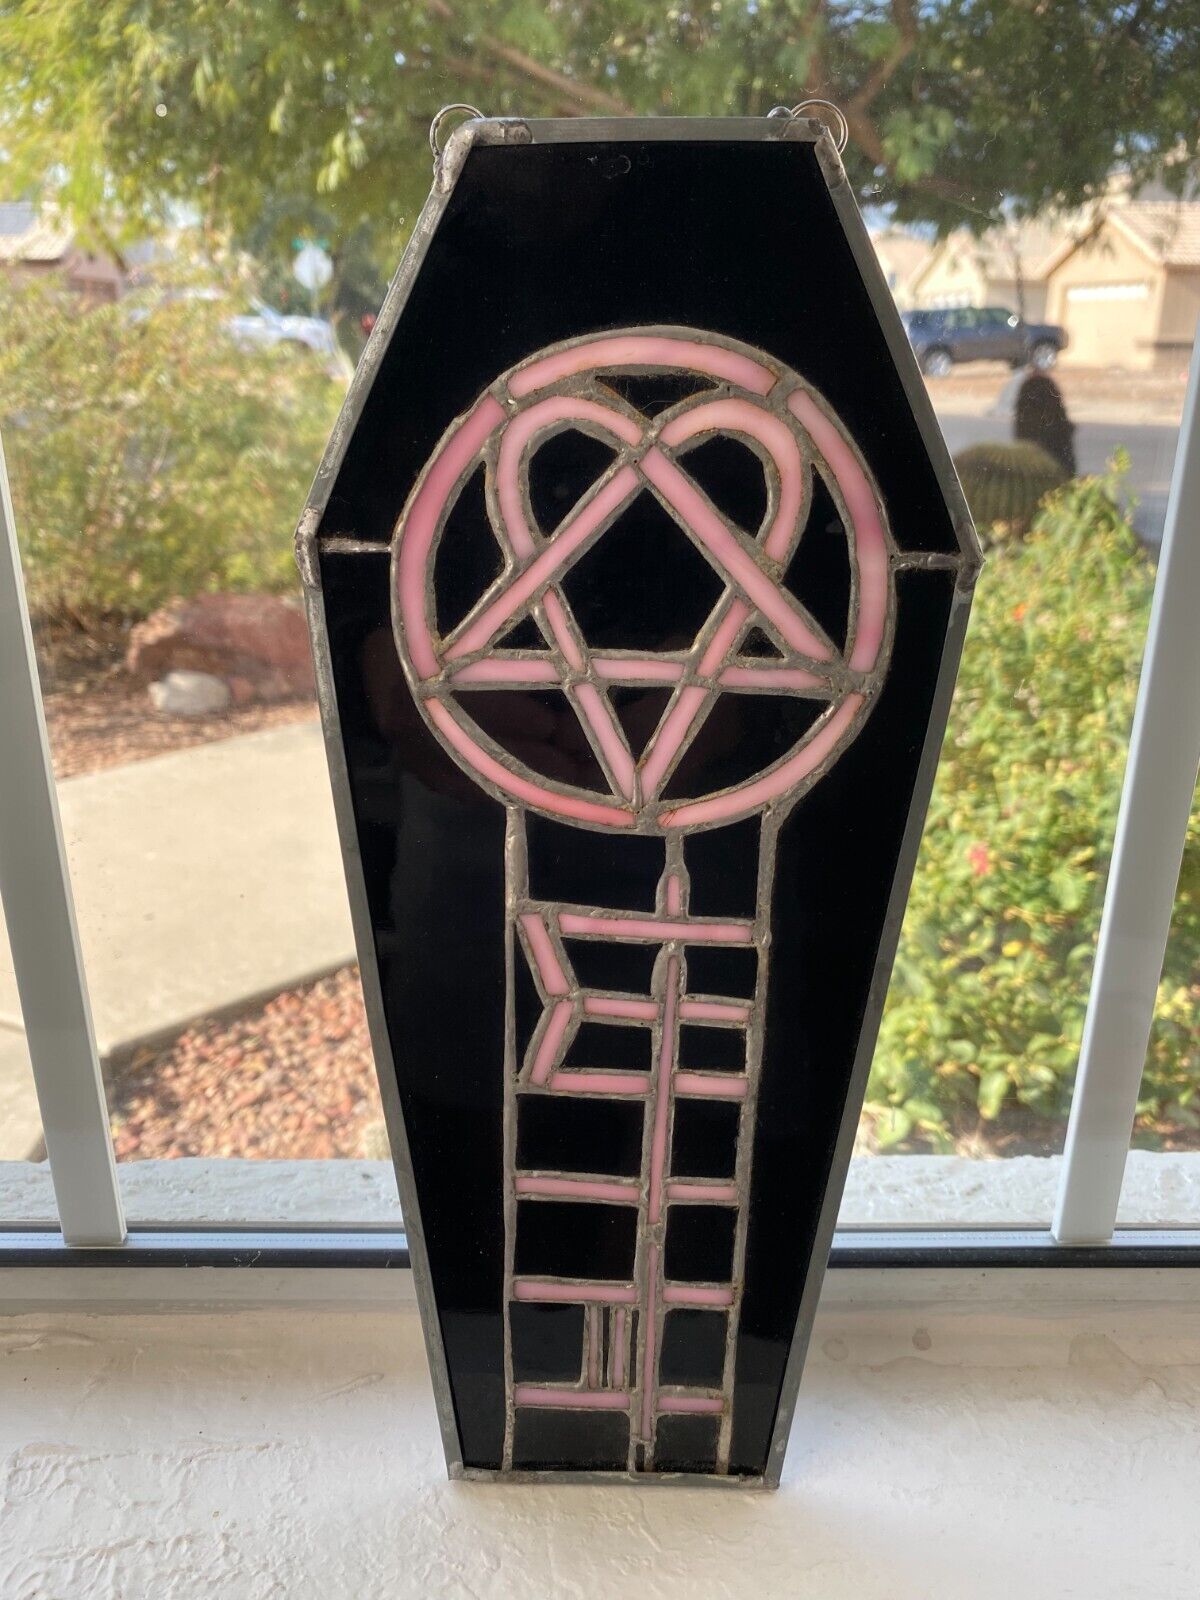 Him Heartagram Hand Crafted Coffin Stained Glass 12 X 5.5" Ville Valo Art